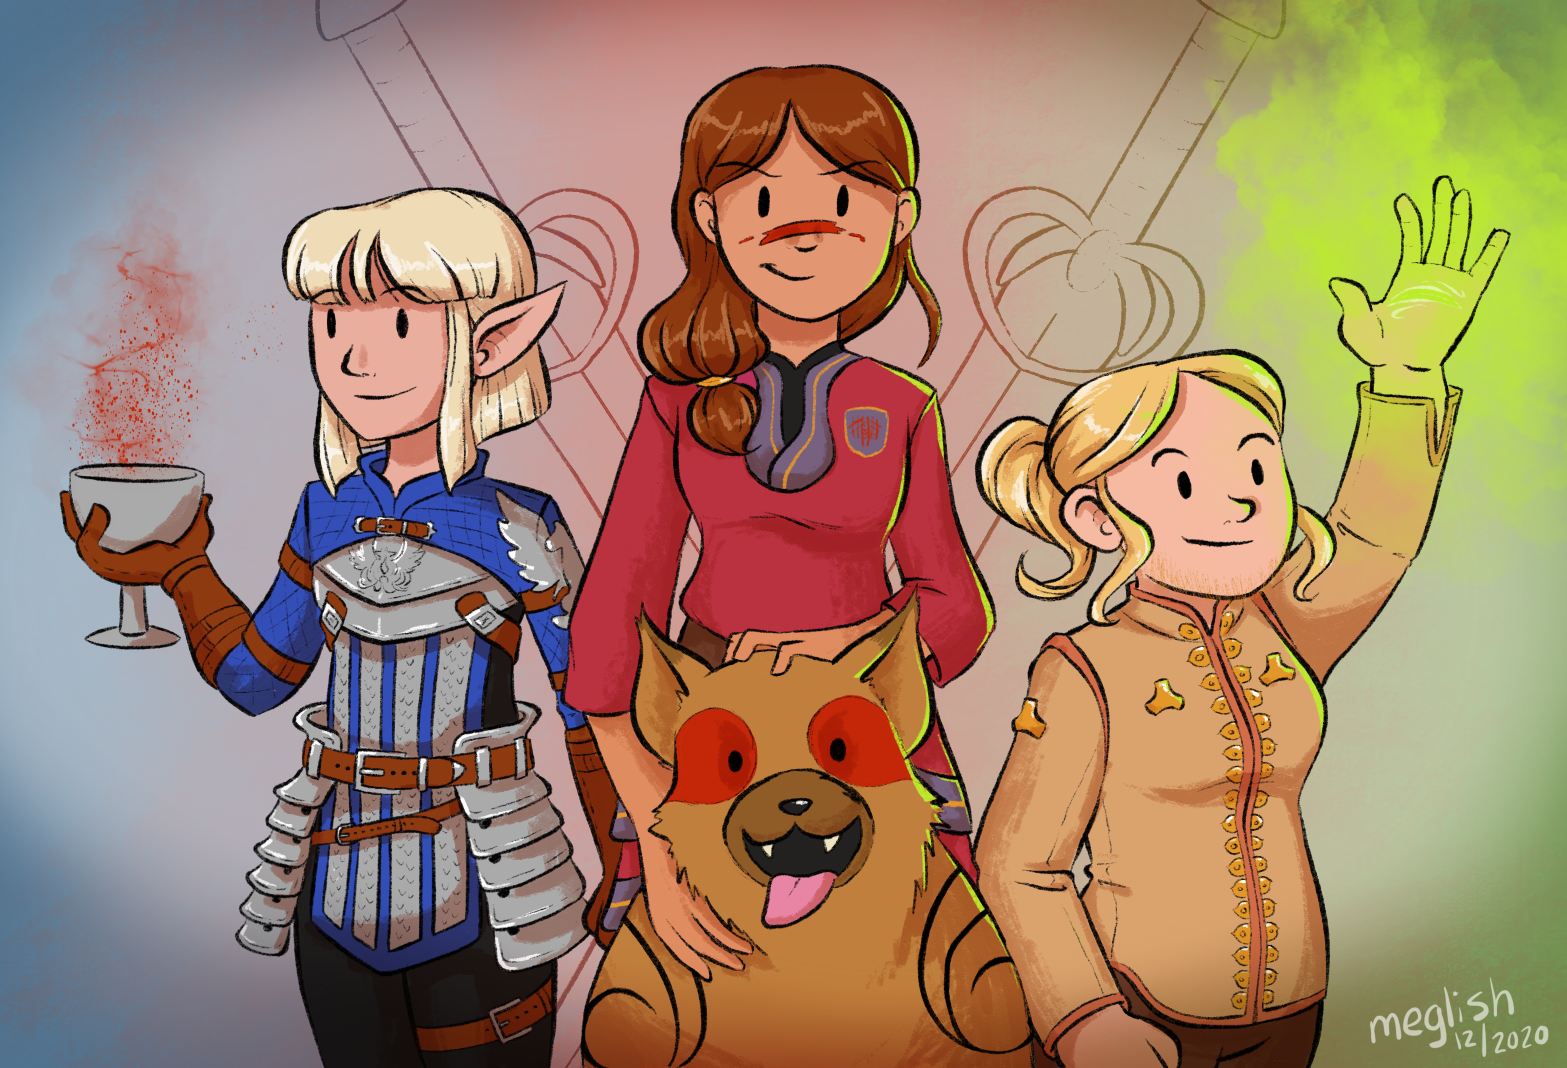 illustration of 3 female Dragon Age protagonists. From left to right, an Elf in Grey Warden armor with short blonde hair holding a silver chalice; a brunette Hawke (default human version) wearing casual clothes and petting a Mabari hound; a Dwarf Inquisitor with a blonde ponytail wearing the tan "Skyhold pajamas" holding her glowing rift hand aloft.